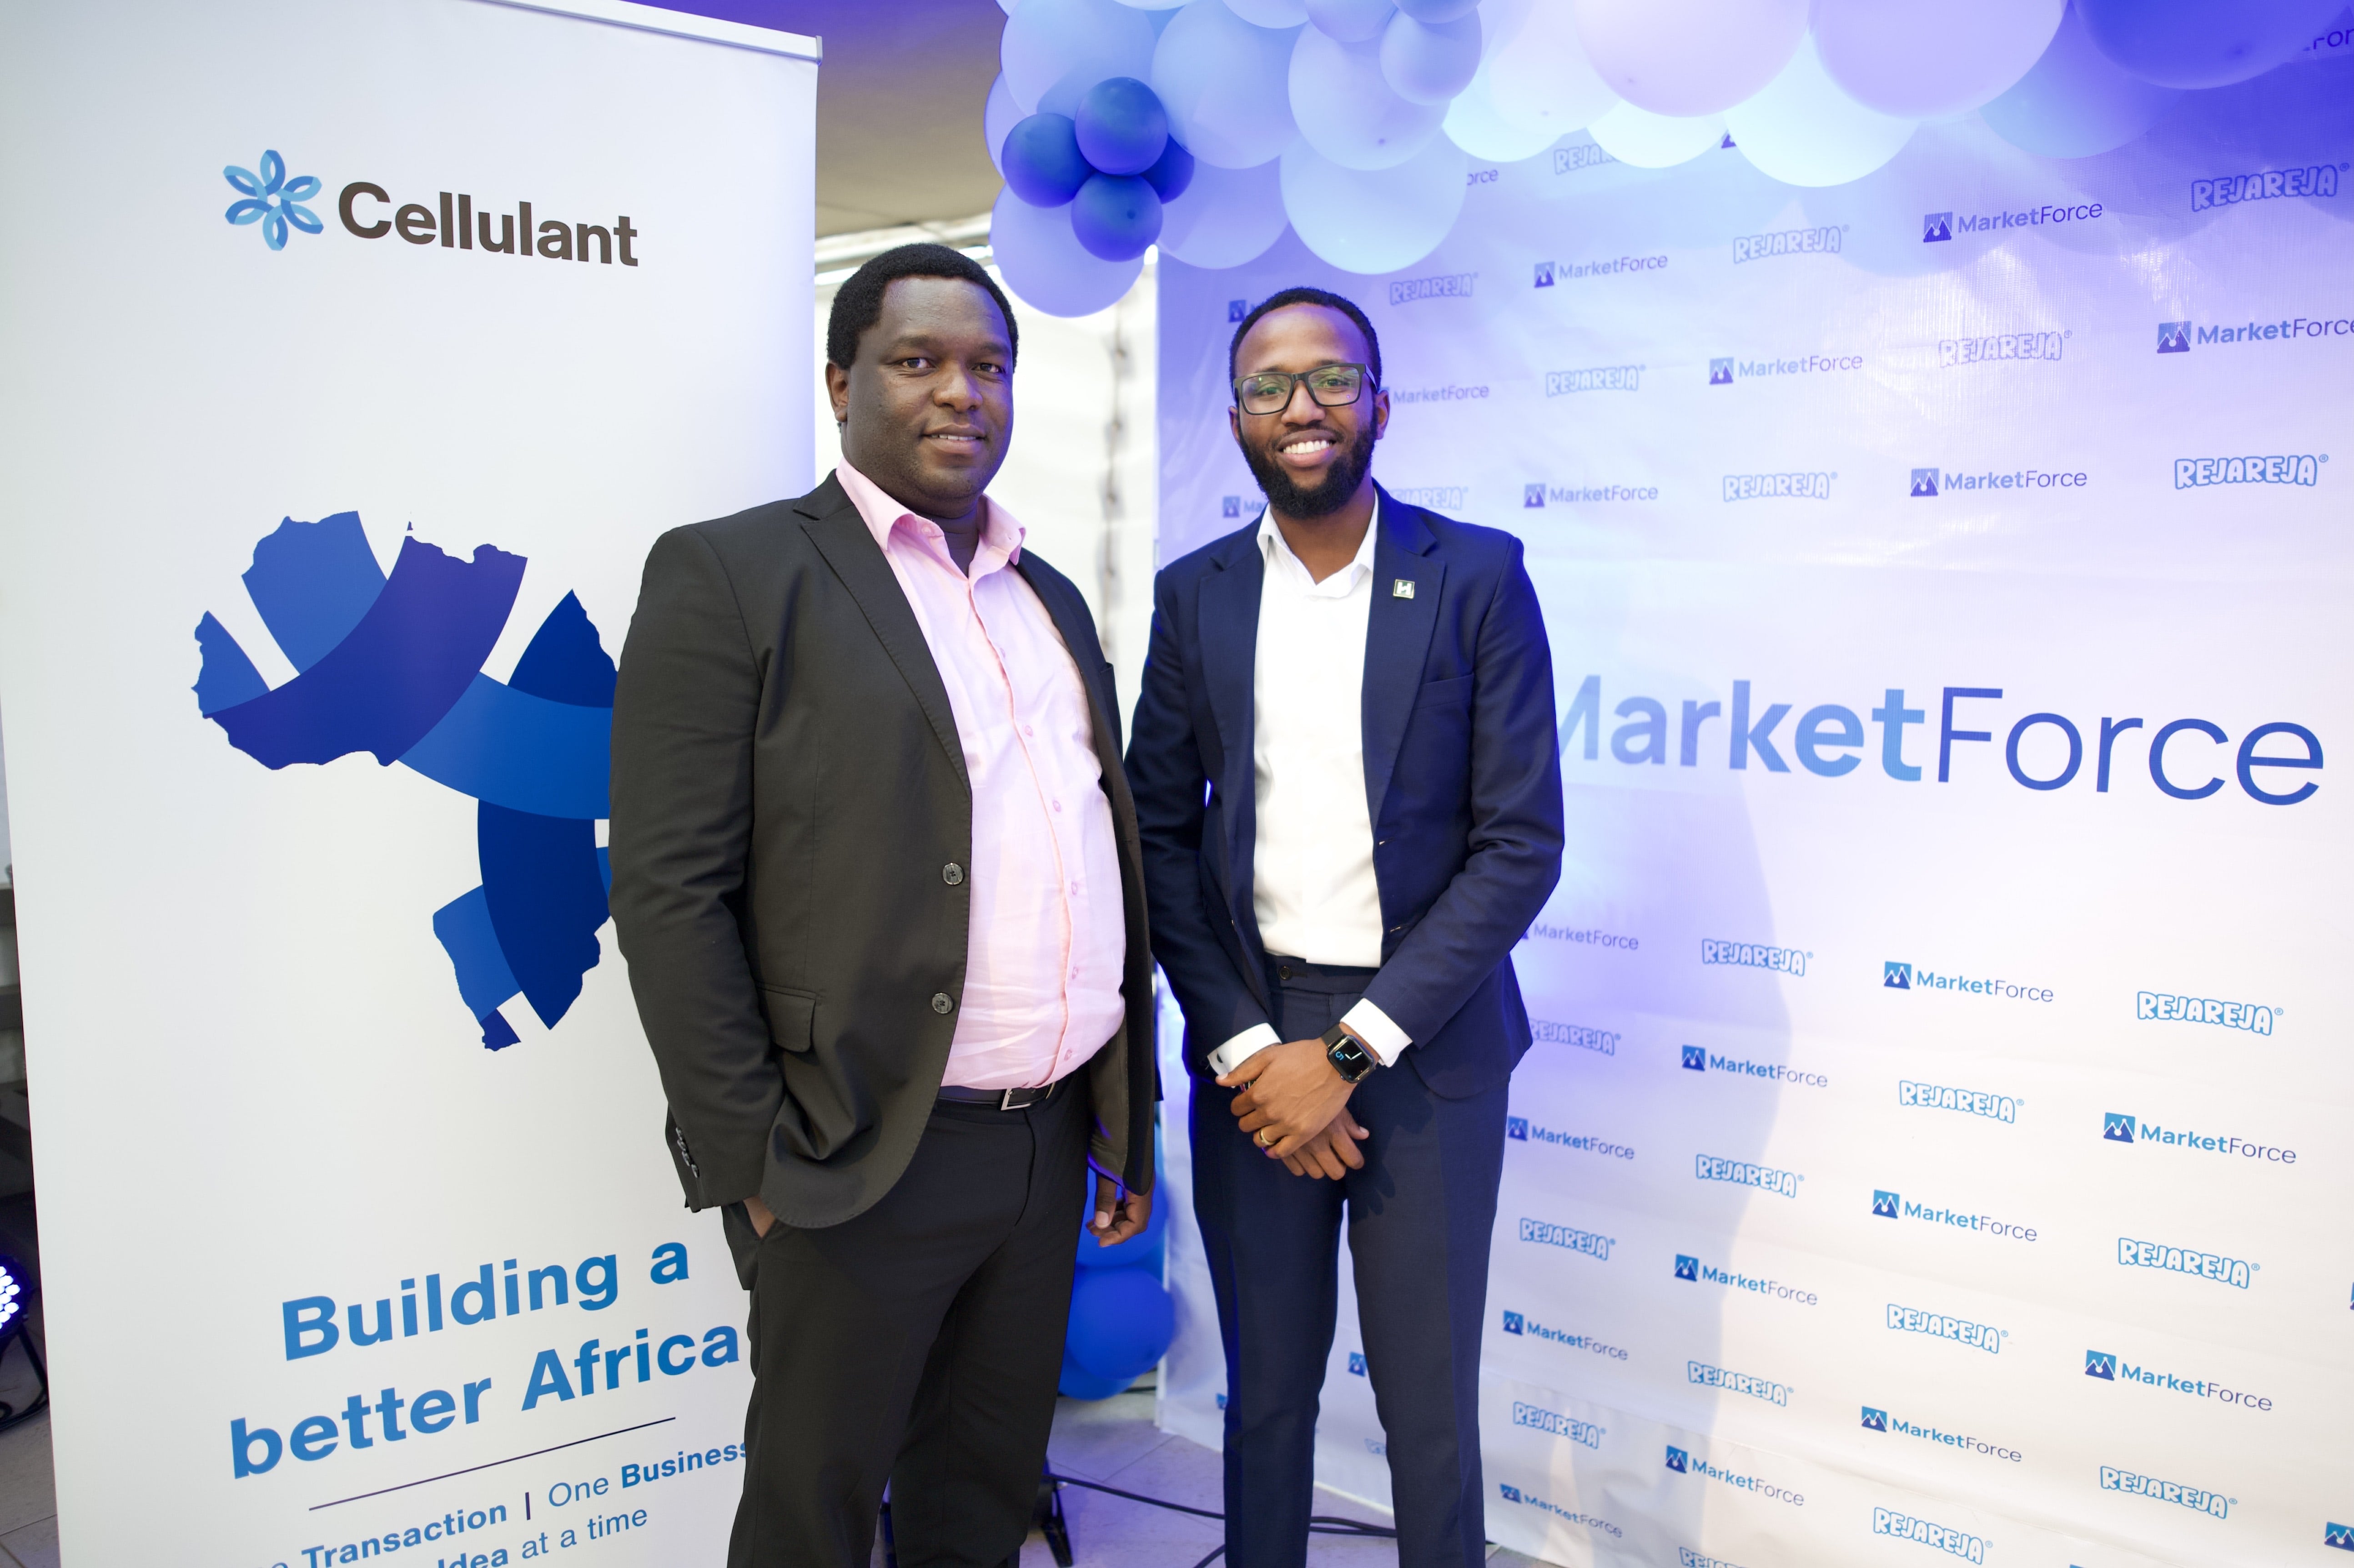 MarketForce partners with Cellulant to expand in five new markets across Africa as it races to cover continent